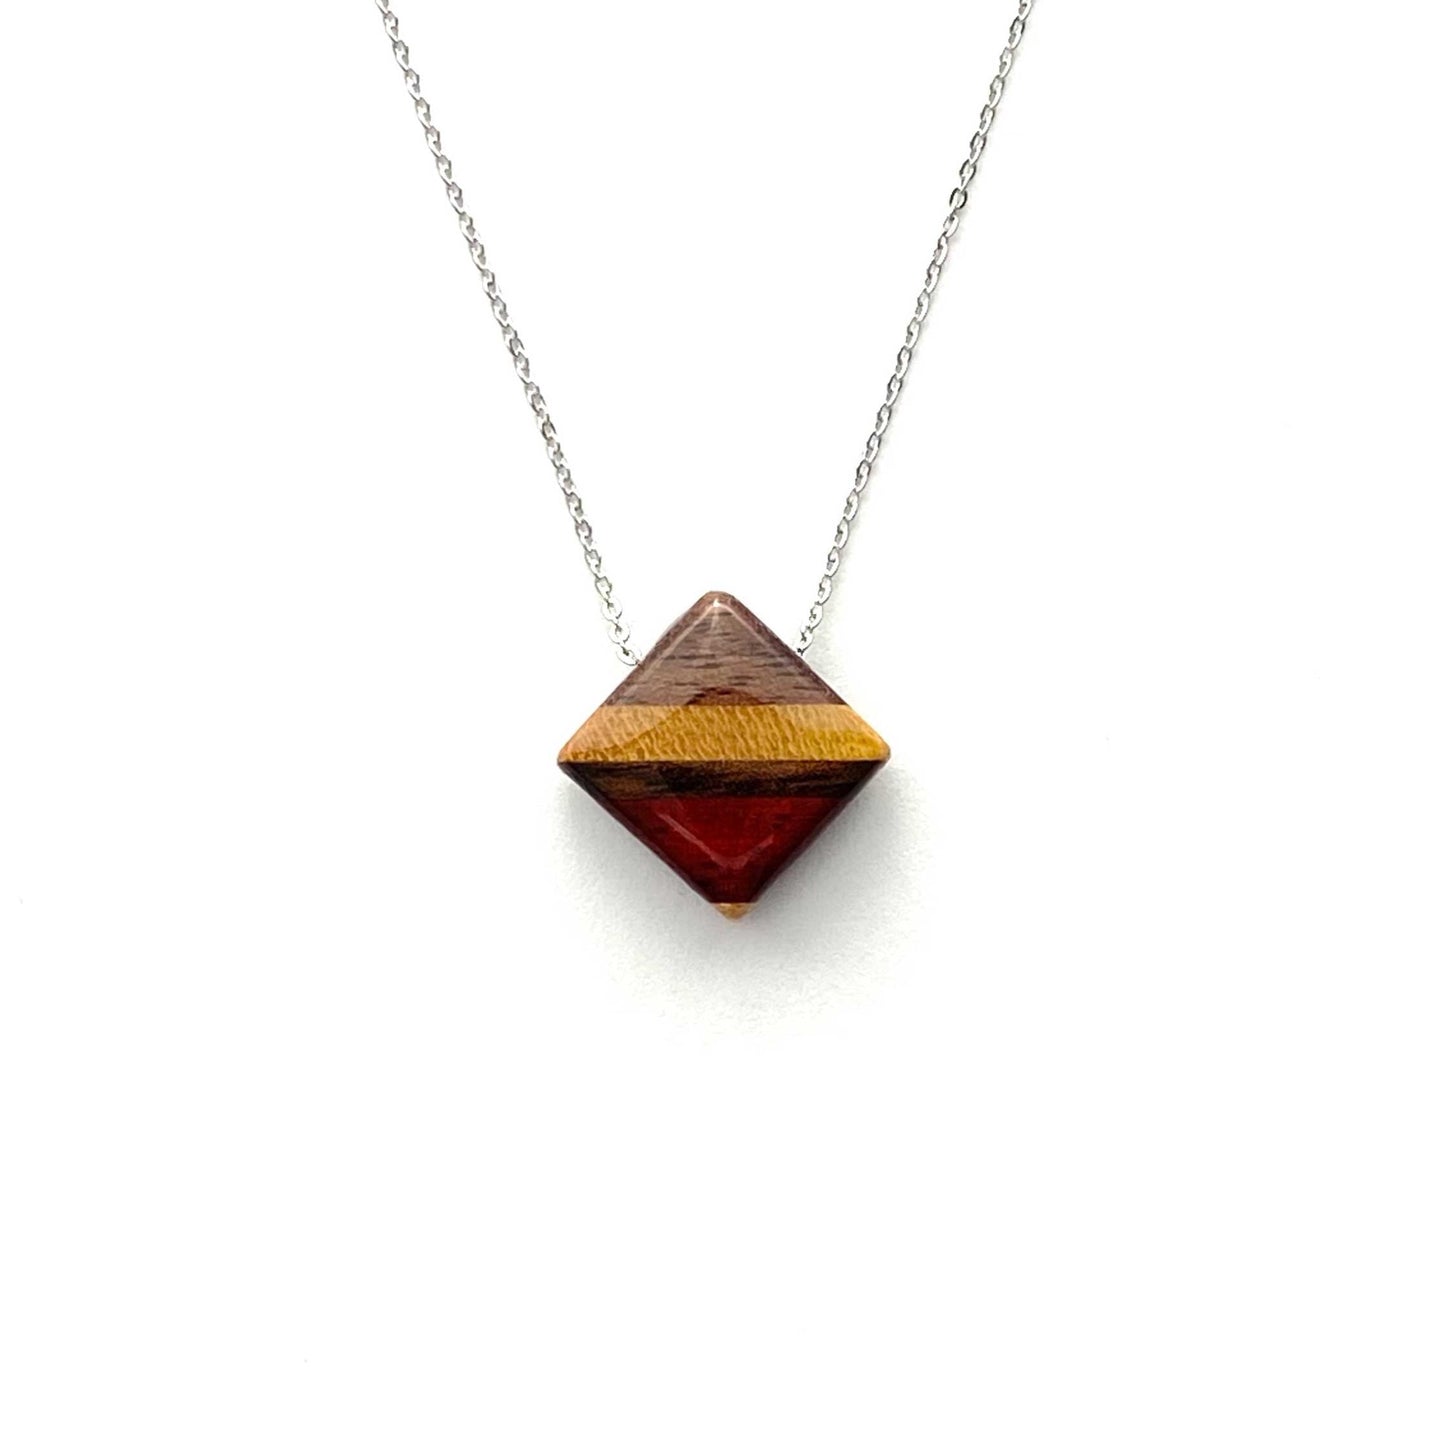 Small Diamond Reclaimed Wood Necklace